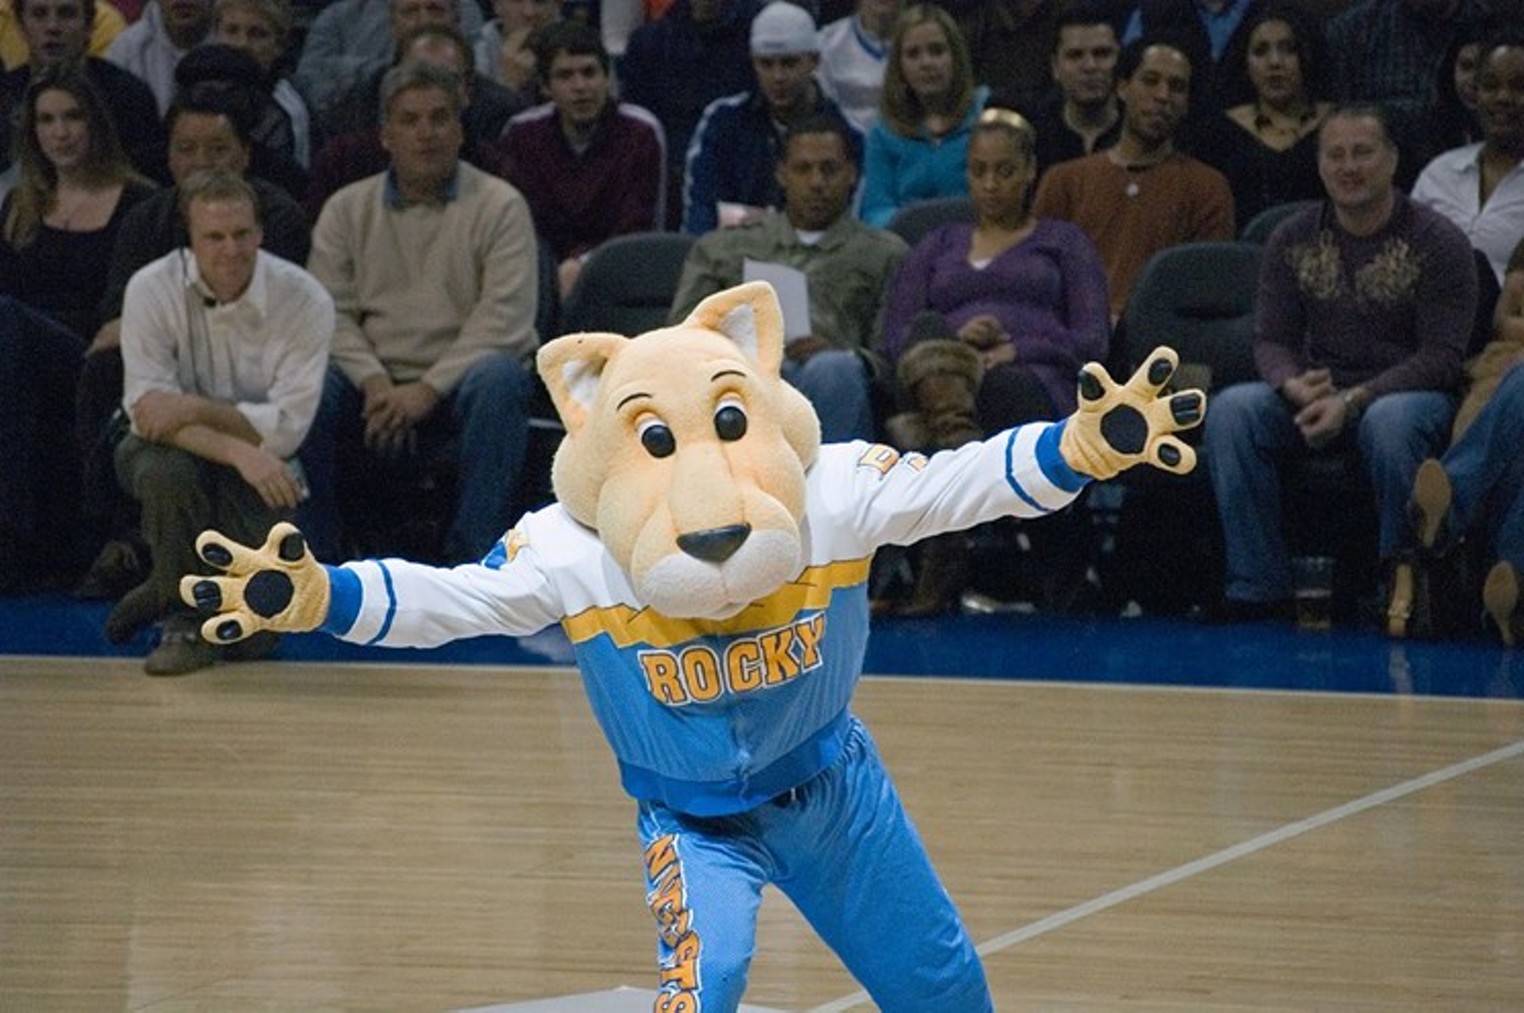 Who Is Inside Rocky, the Denver Nuggets Mascot, Right Now?